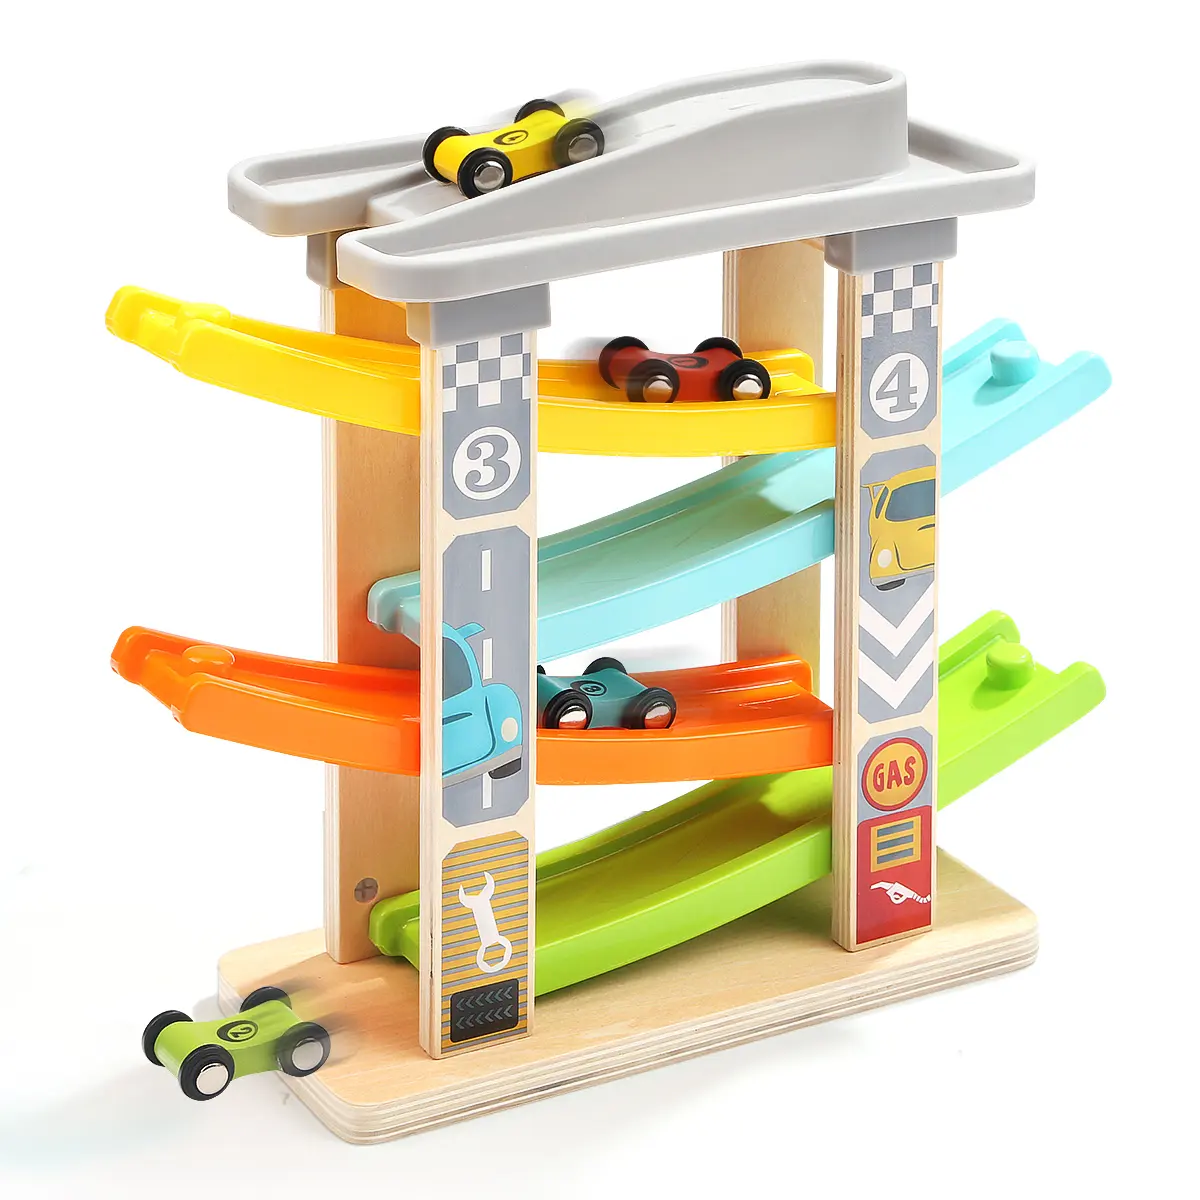 Topbright Toddler Toys For 1 2 Year Old Boy And Girl Gifts Wooden Race Track Car Ramp Racer With 4 Mini Cars